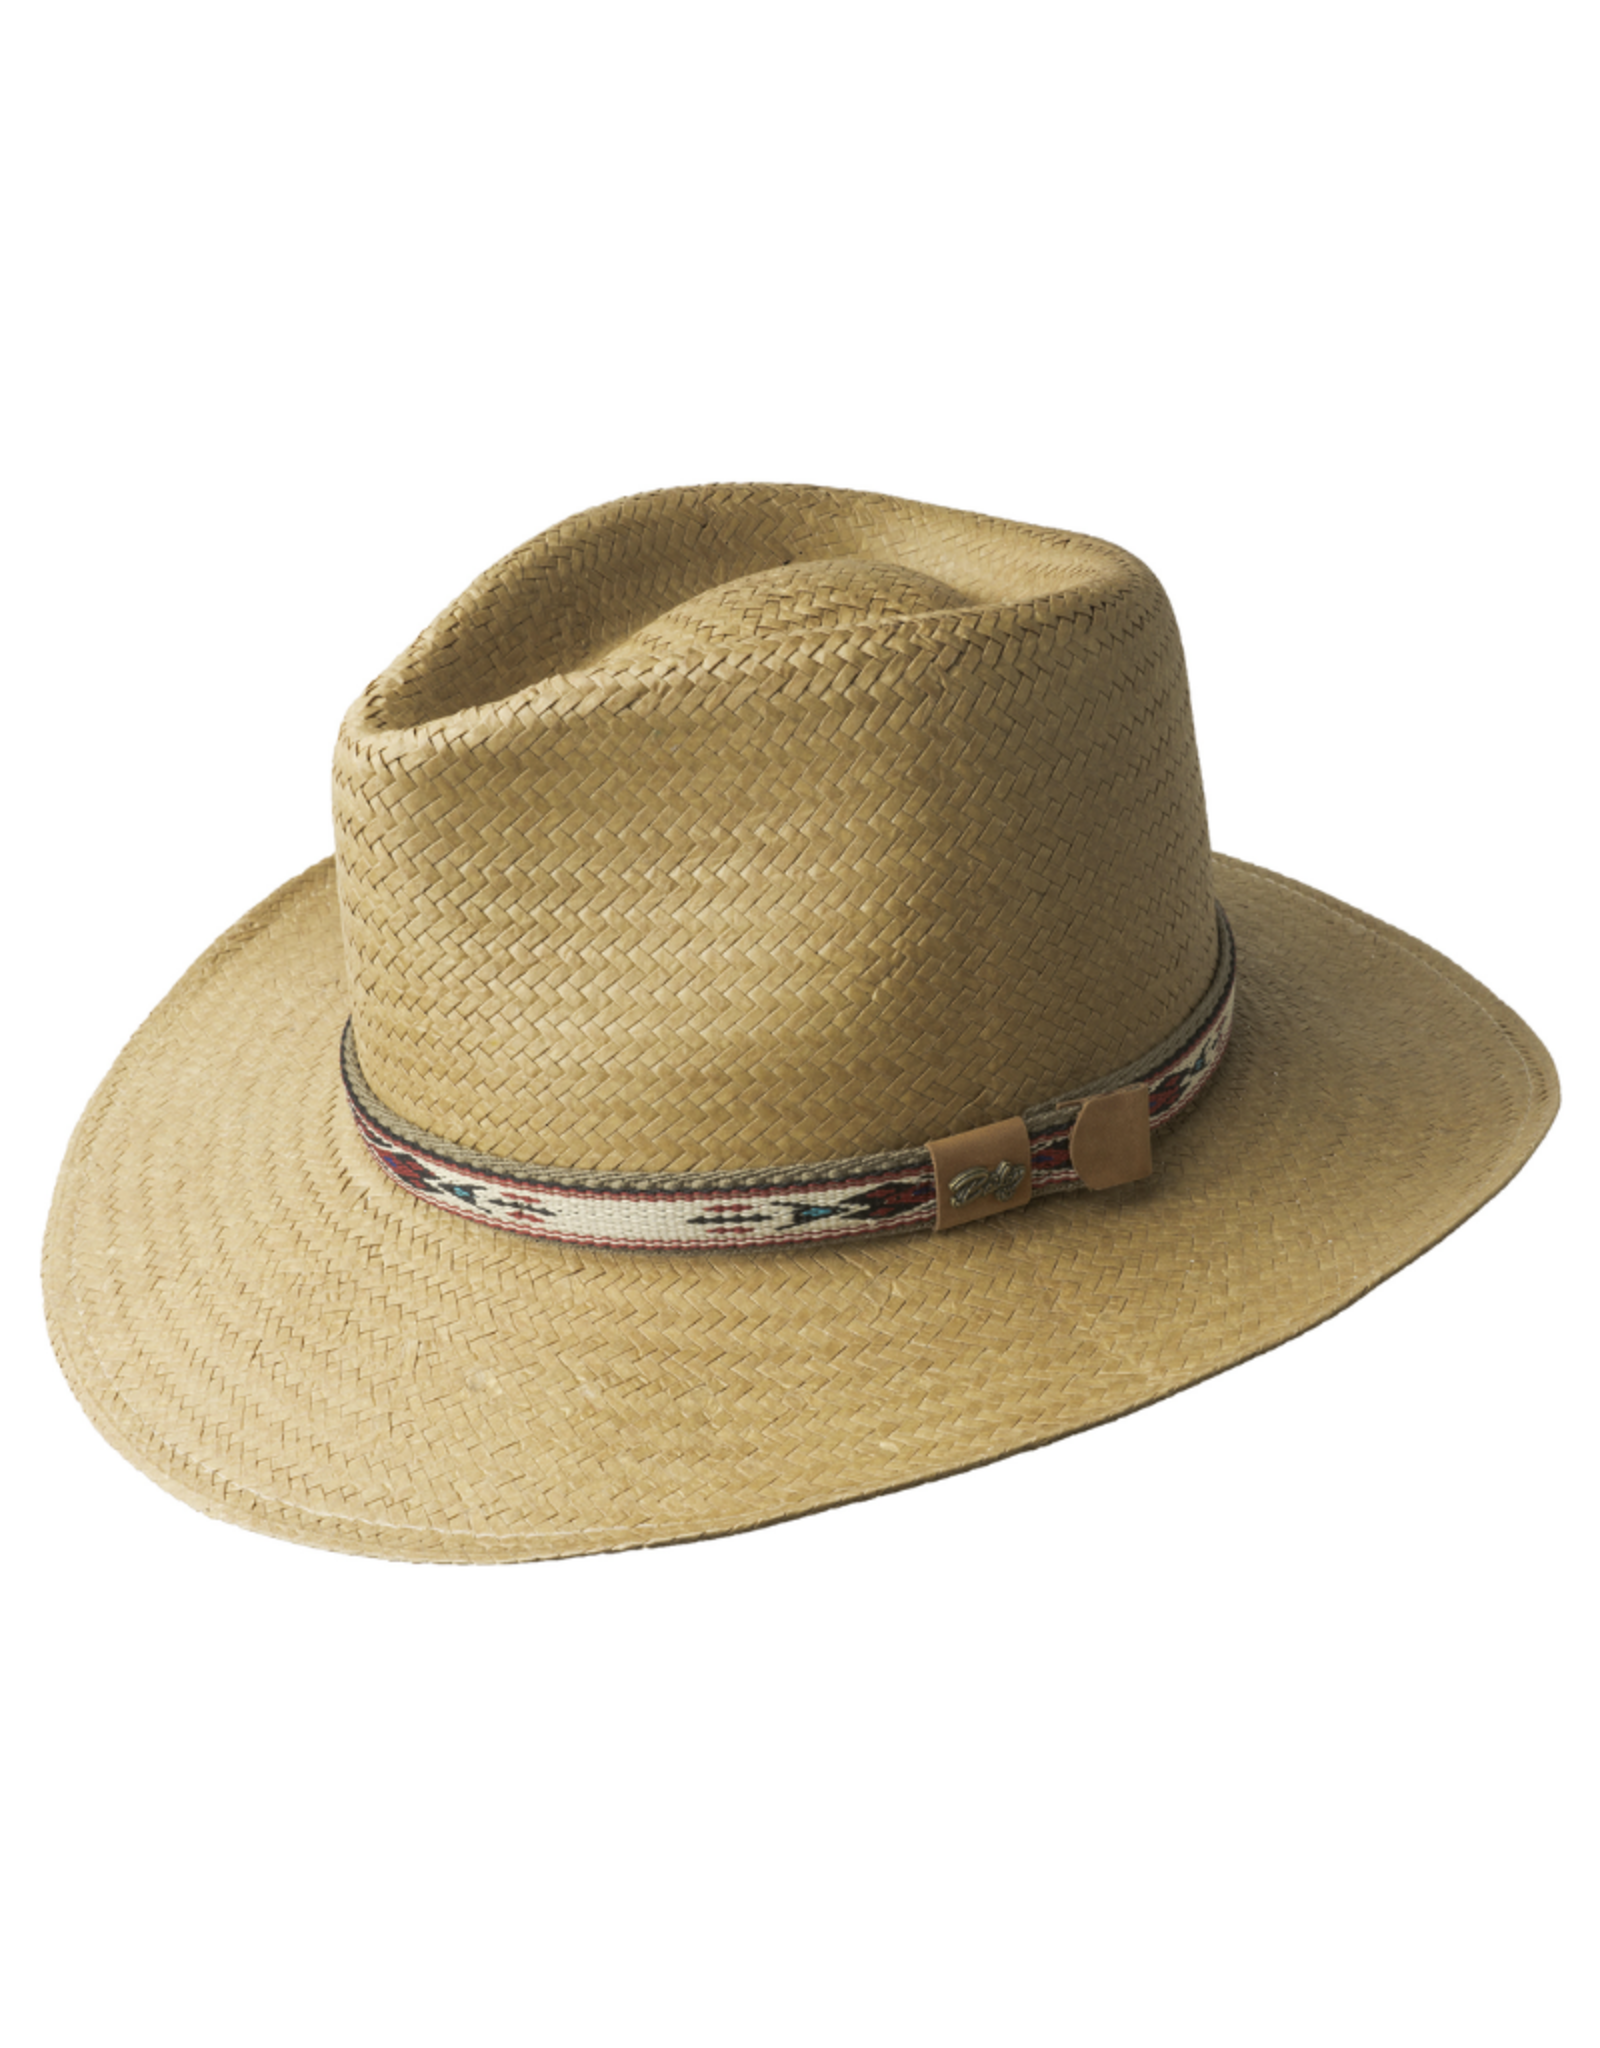 Bailey Hat Co. HAT-OUTBACK "DERIAN"